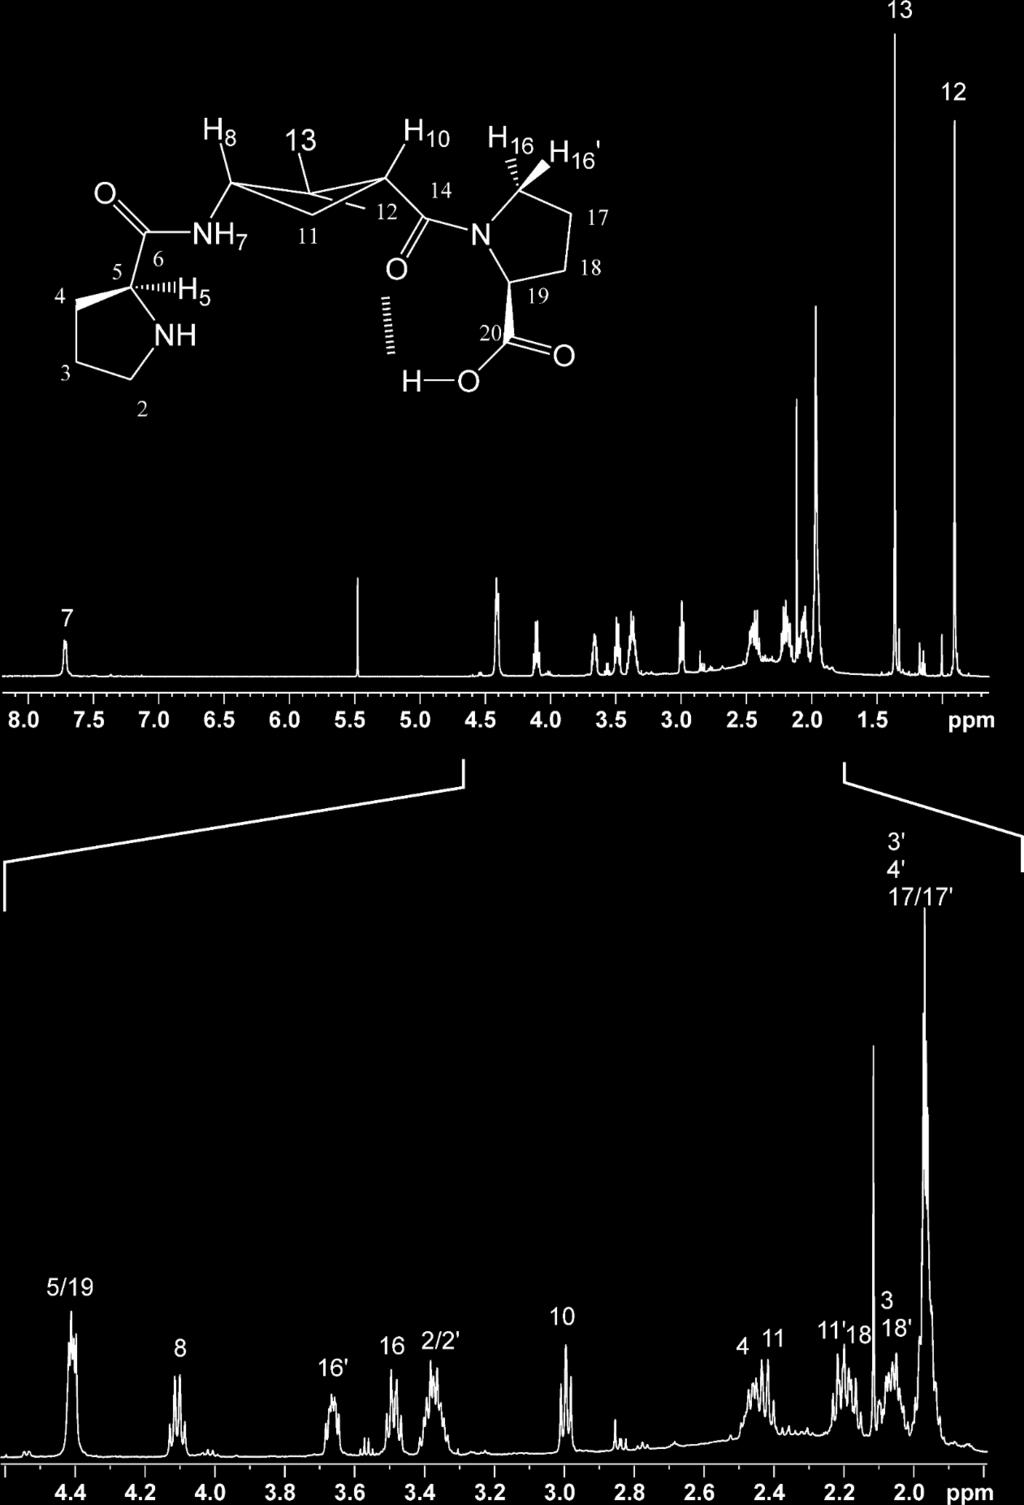 NMR spectra for the structural study of catalyst